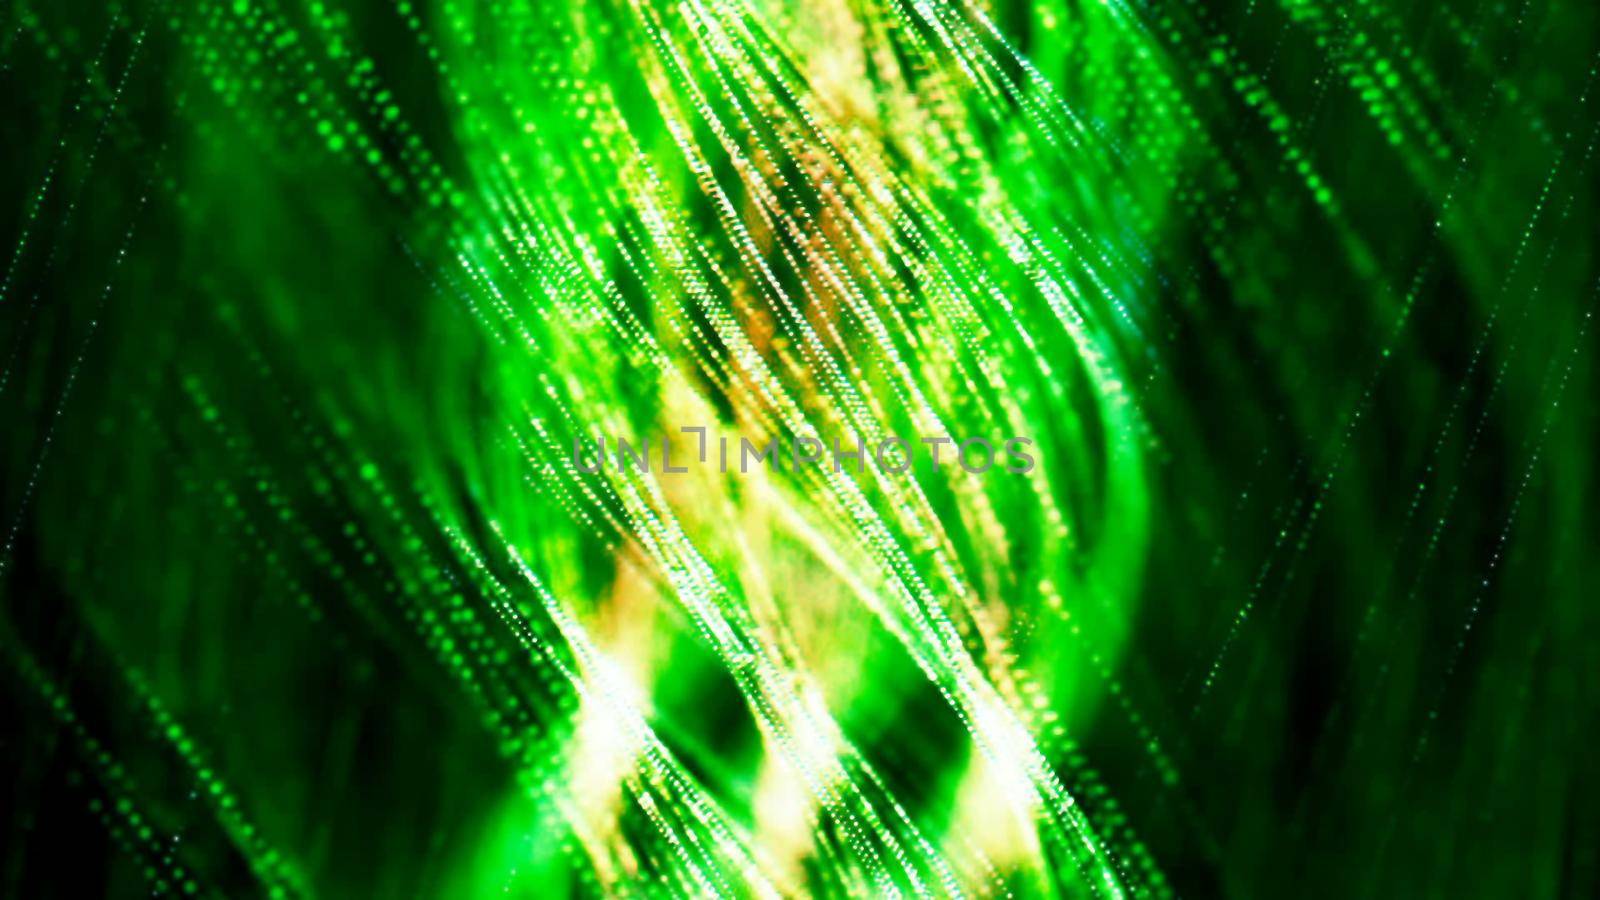 Background with nice abstract green spiral 3D rendering by designprojects